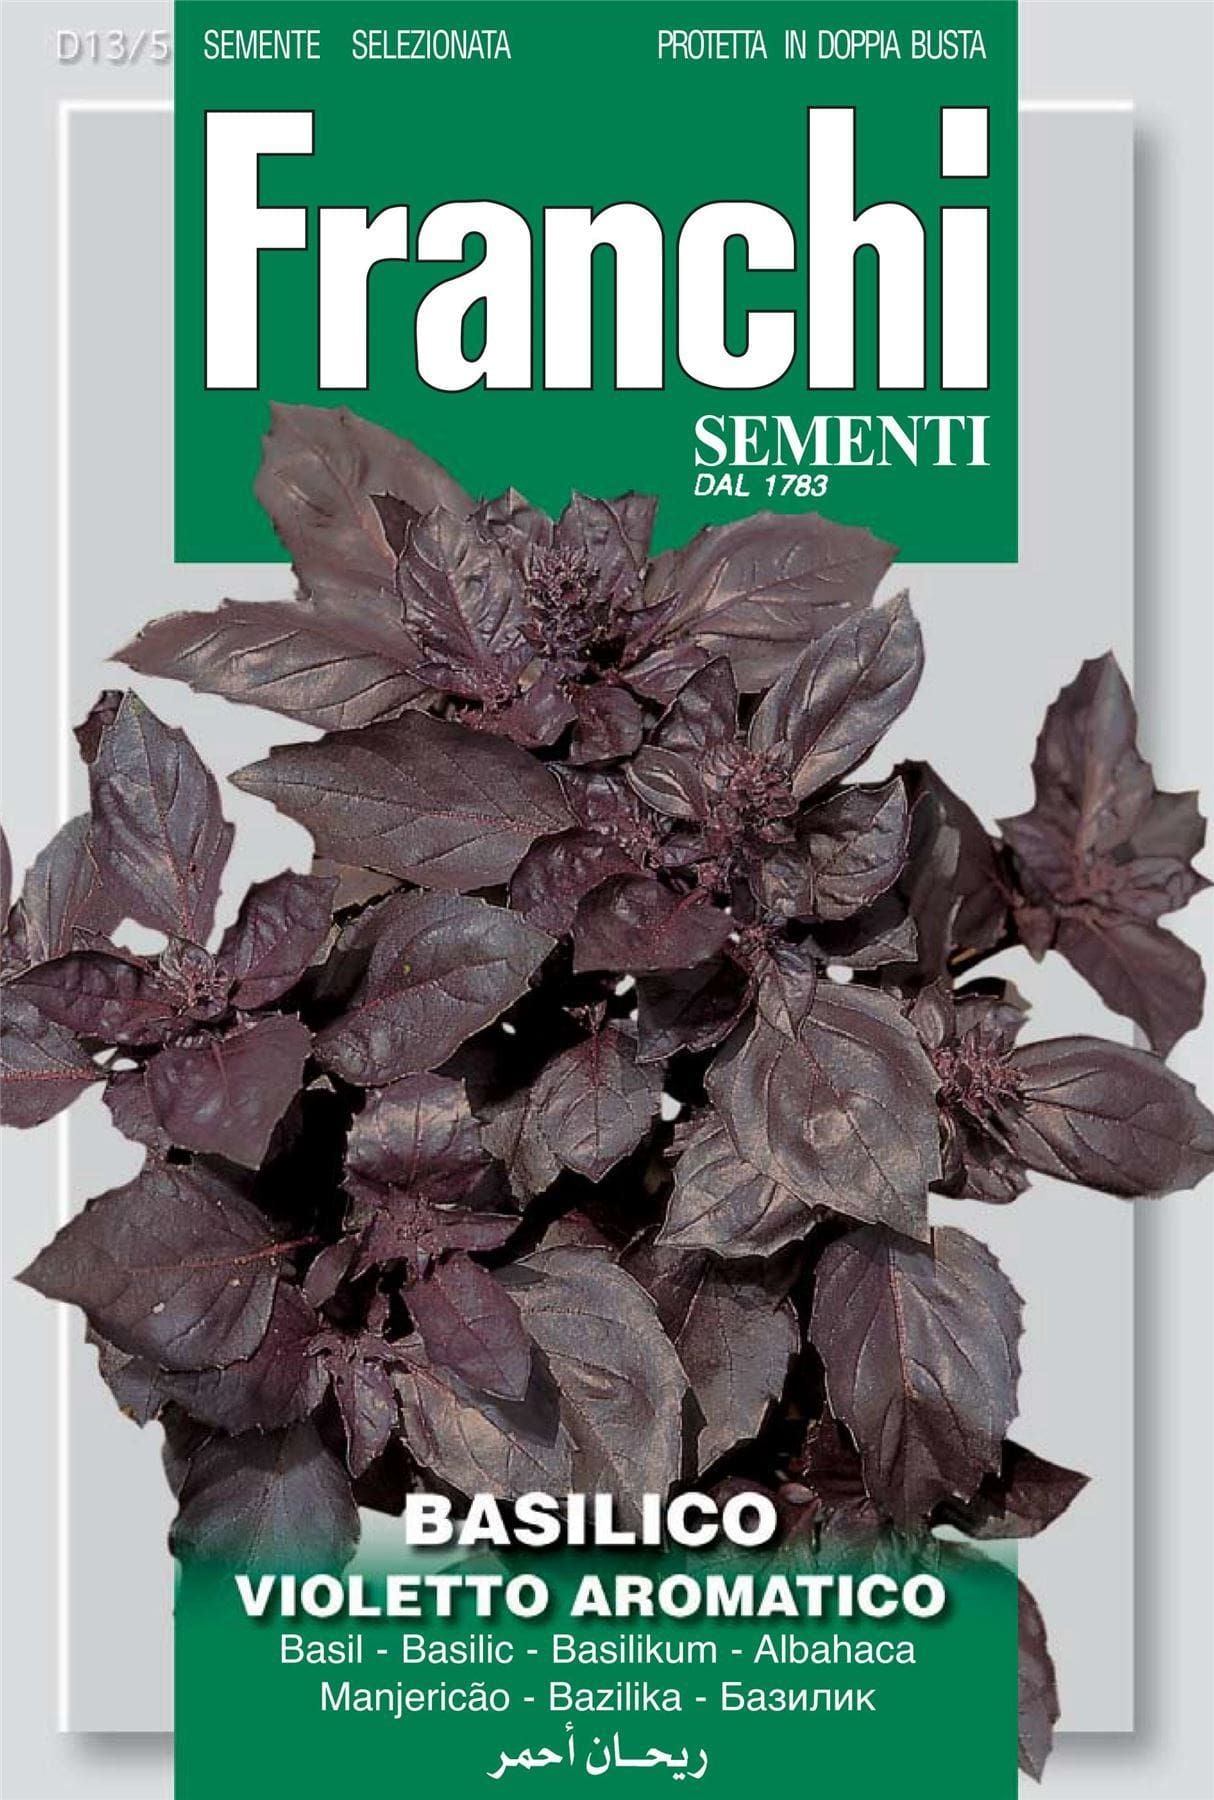 Franchi Seeds of Italy - DBO 13/5 - Basil - Violetto Aromatico - Dark Opal - Seeds